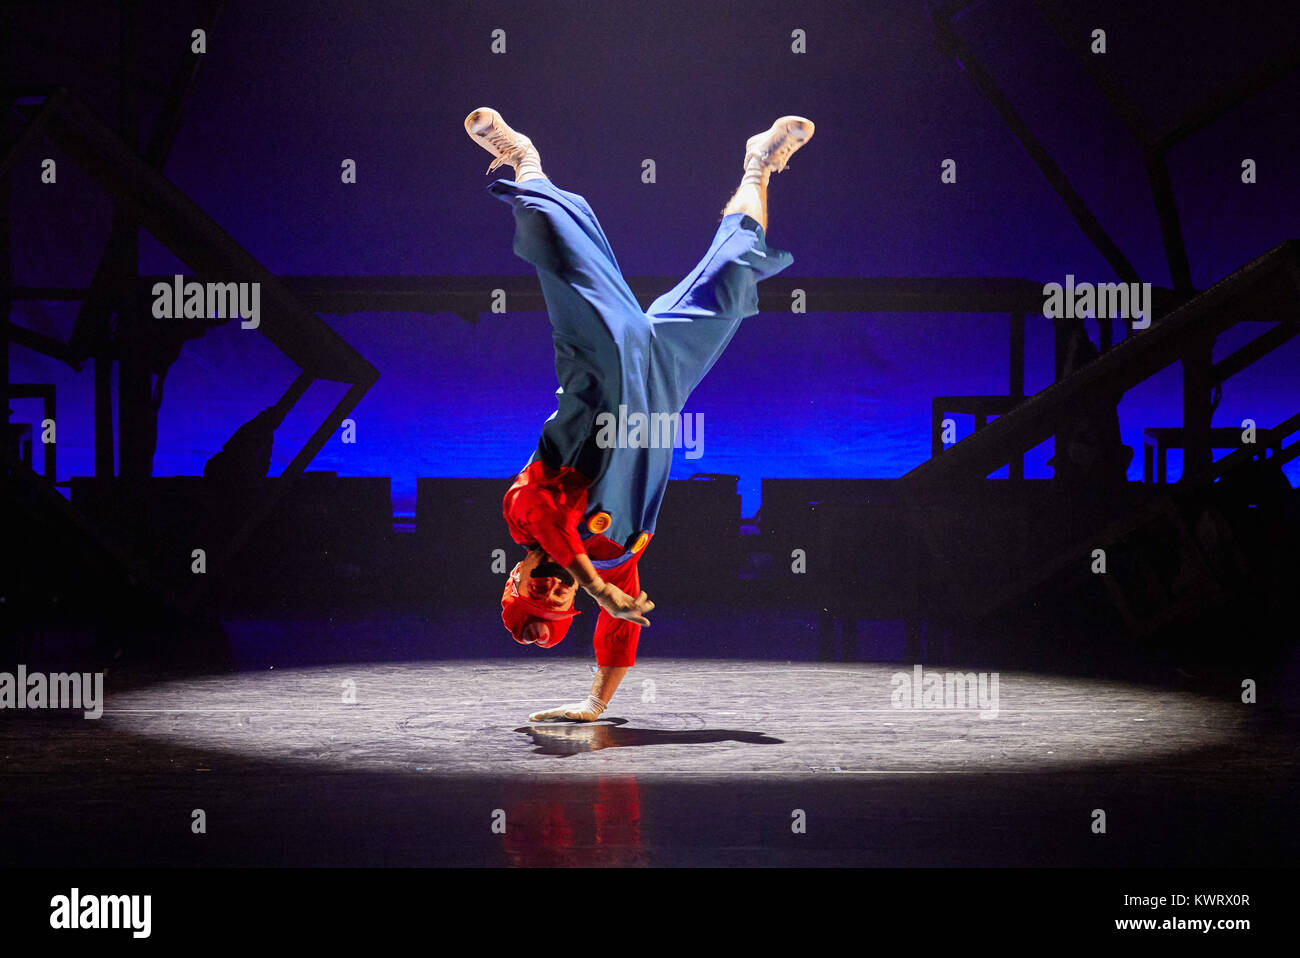 Hamburg, Germany. 05th Jan, 2018. The dancer Bruce Almighty performs as Super Mario during a press event for the dance show 'The Nutcracker Reloaded - Tchaikovksy meets street dance' at the Kampnagel in Hamburg, Germany, 05 January 2018. The German premiere is on 05 January 2018. Credit: Georg Wendt/dpa/Alamy Live News Stock Photo